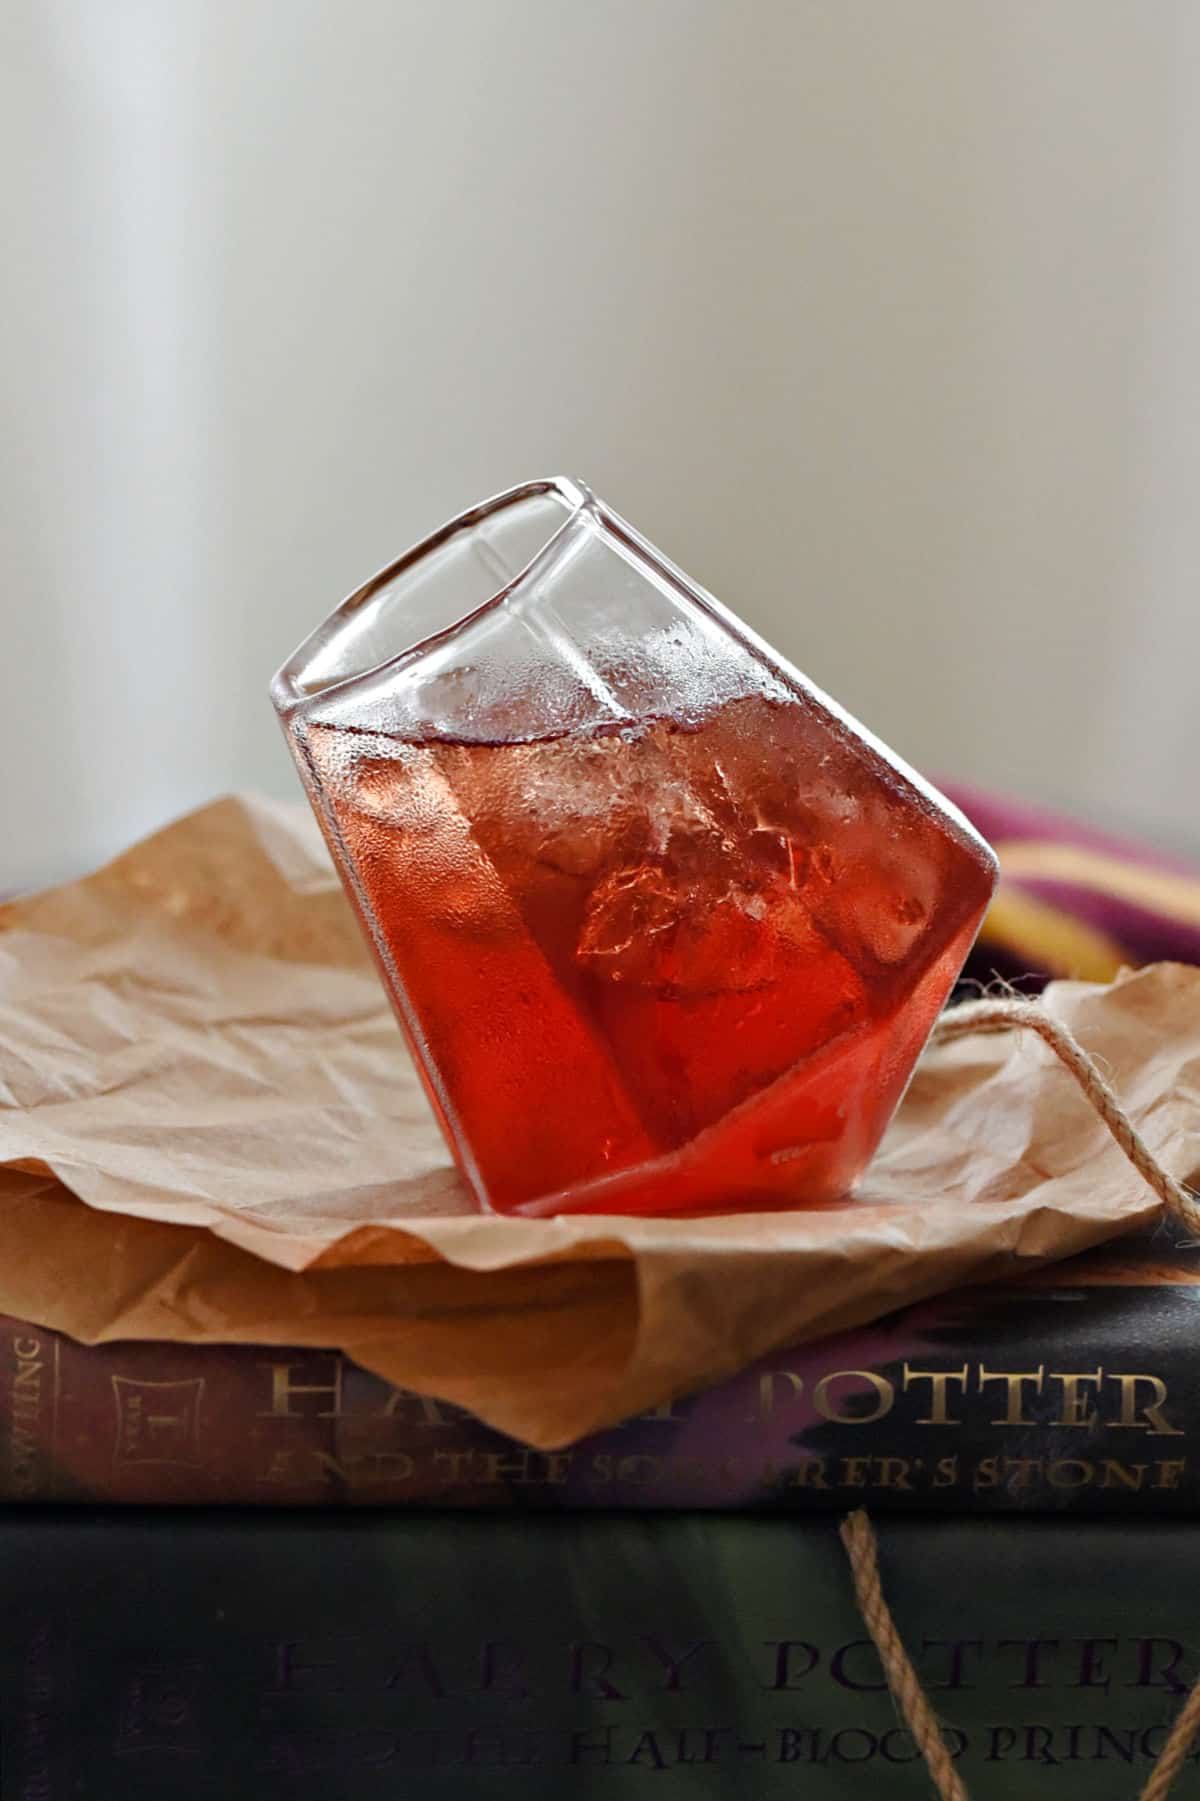 Red cocktail in a square cut glass sitting on brown paper in front of Harry Potter books.